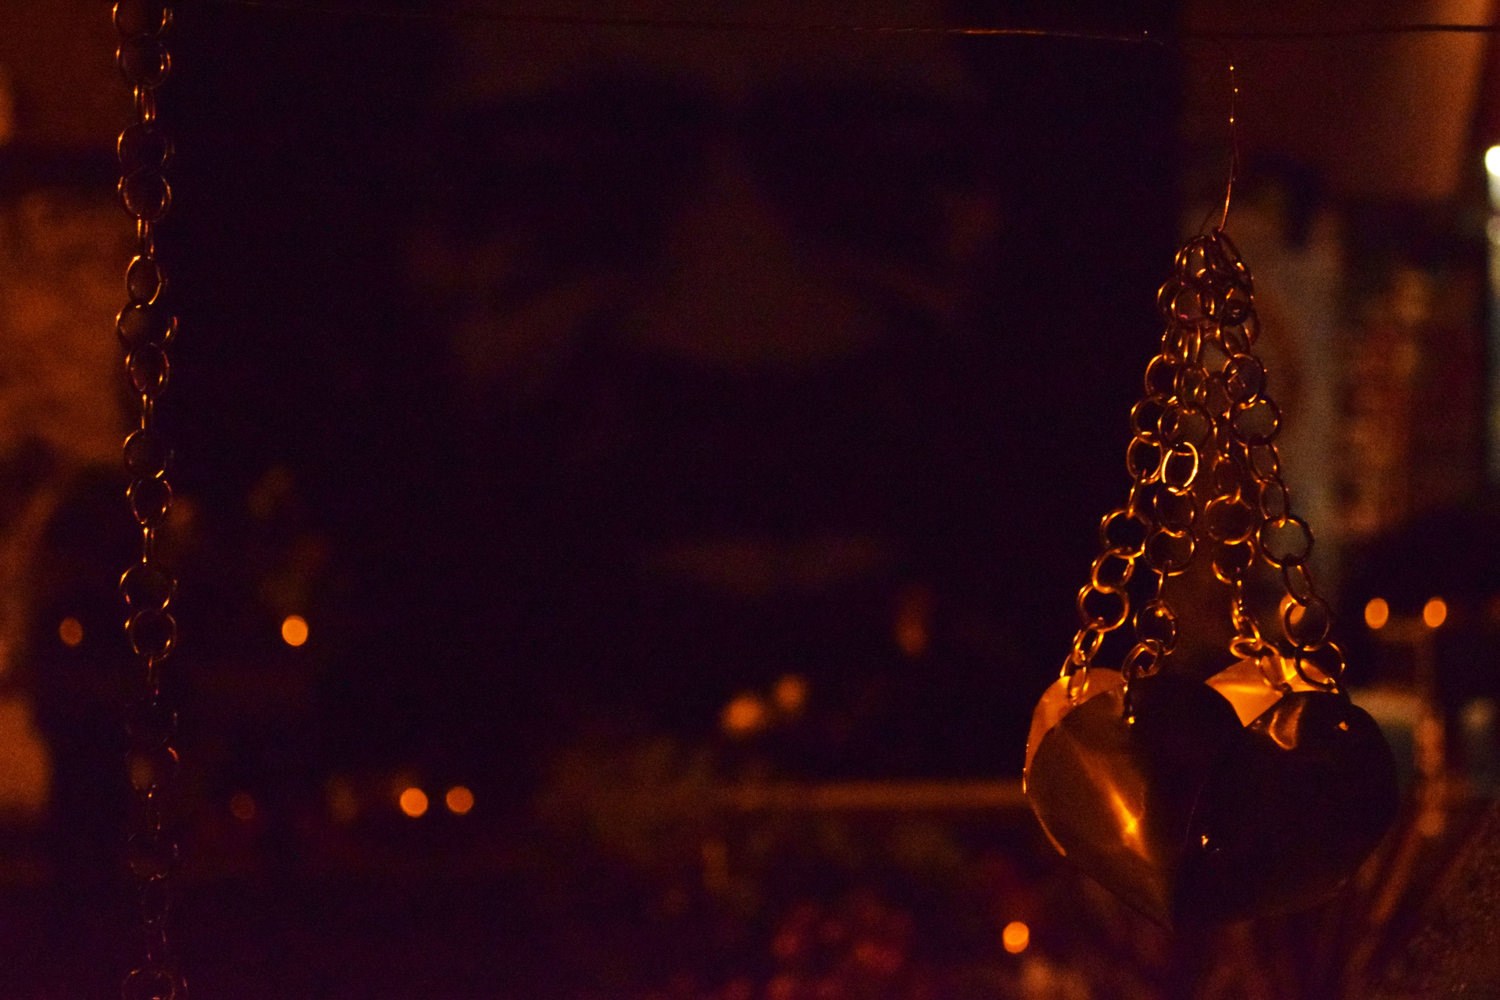 A candle lights a heart-shaped luminary suspended from a metal chain in front of George Floyd’s portrait.